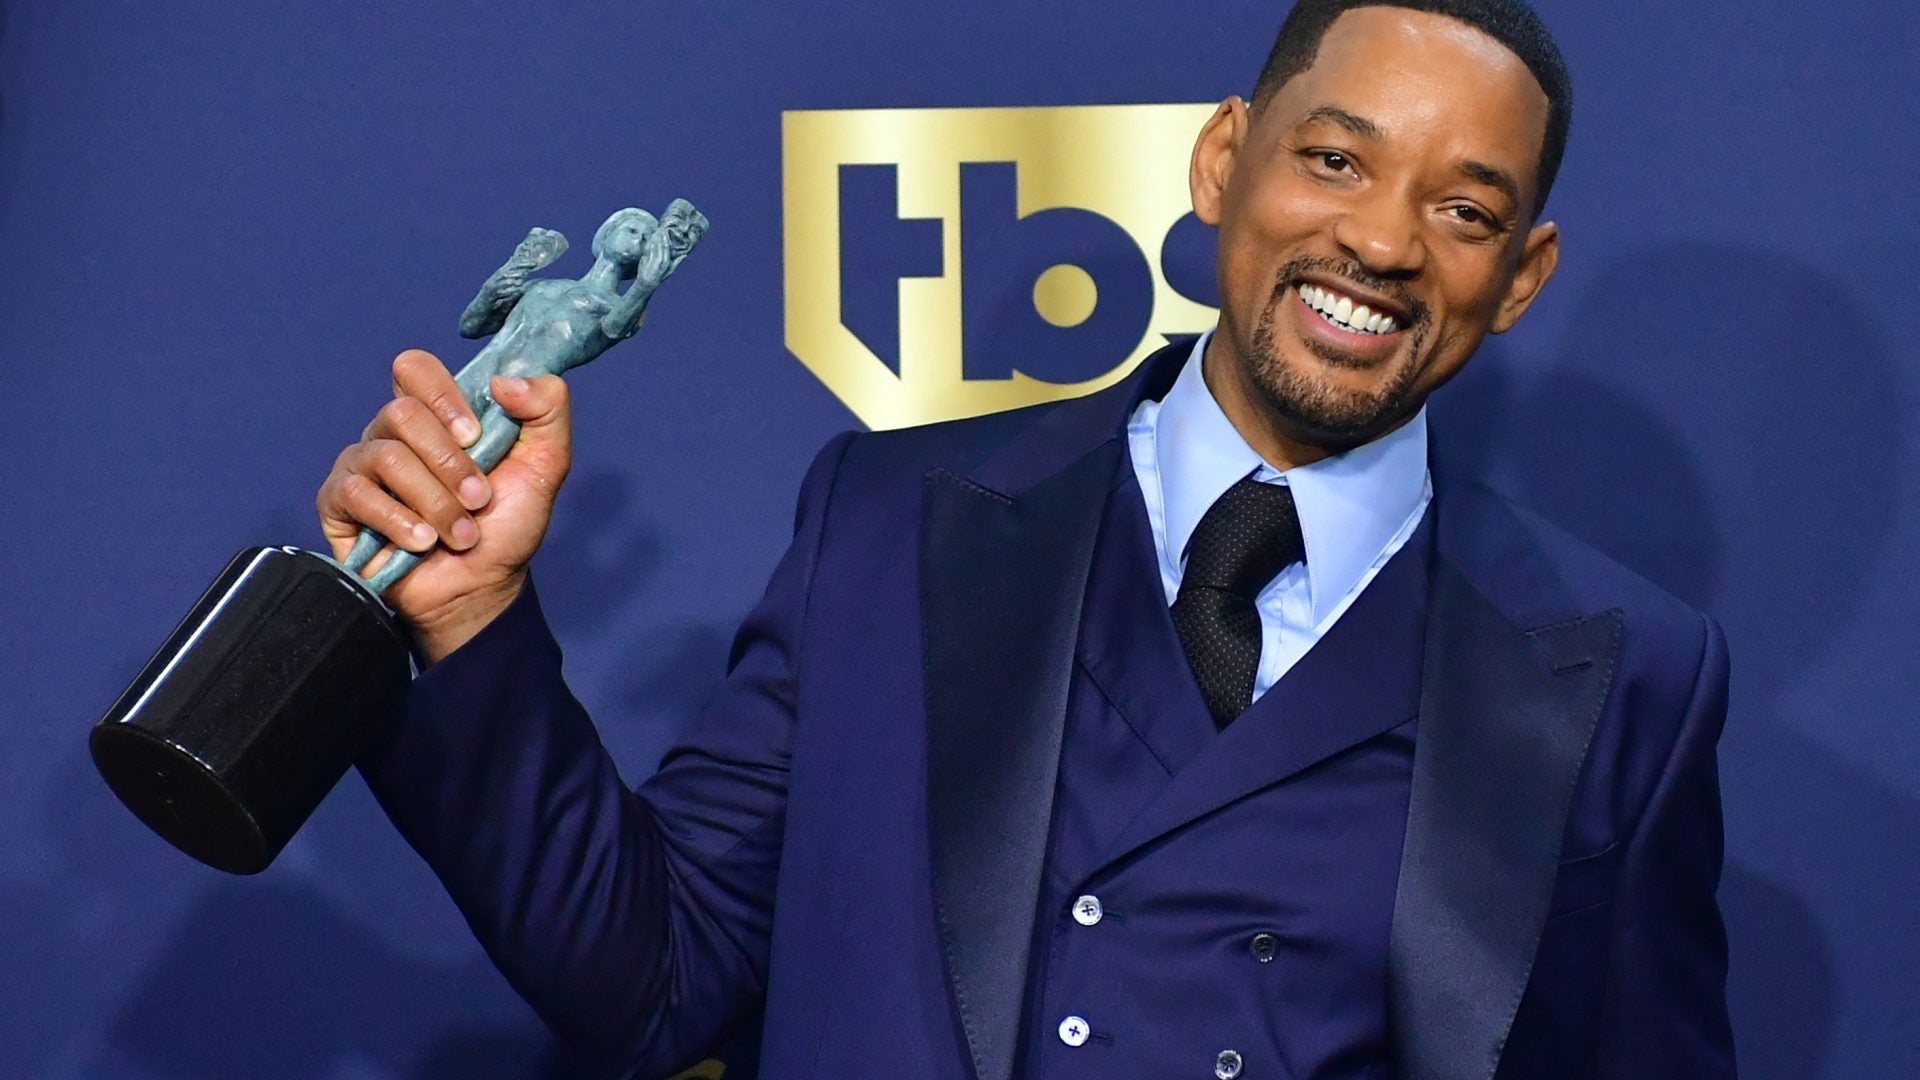 WATCH: Will Smith Discusses His Latest 'Growth Spurt' After Emotional SAG Awards Win